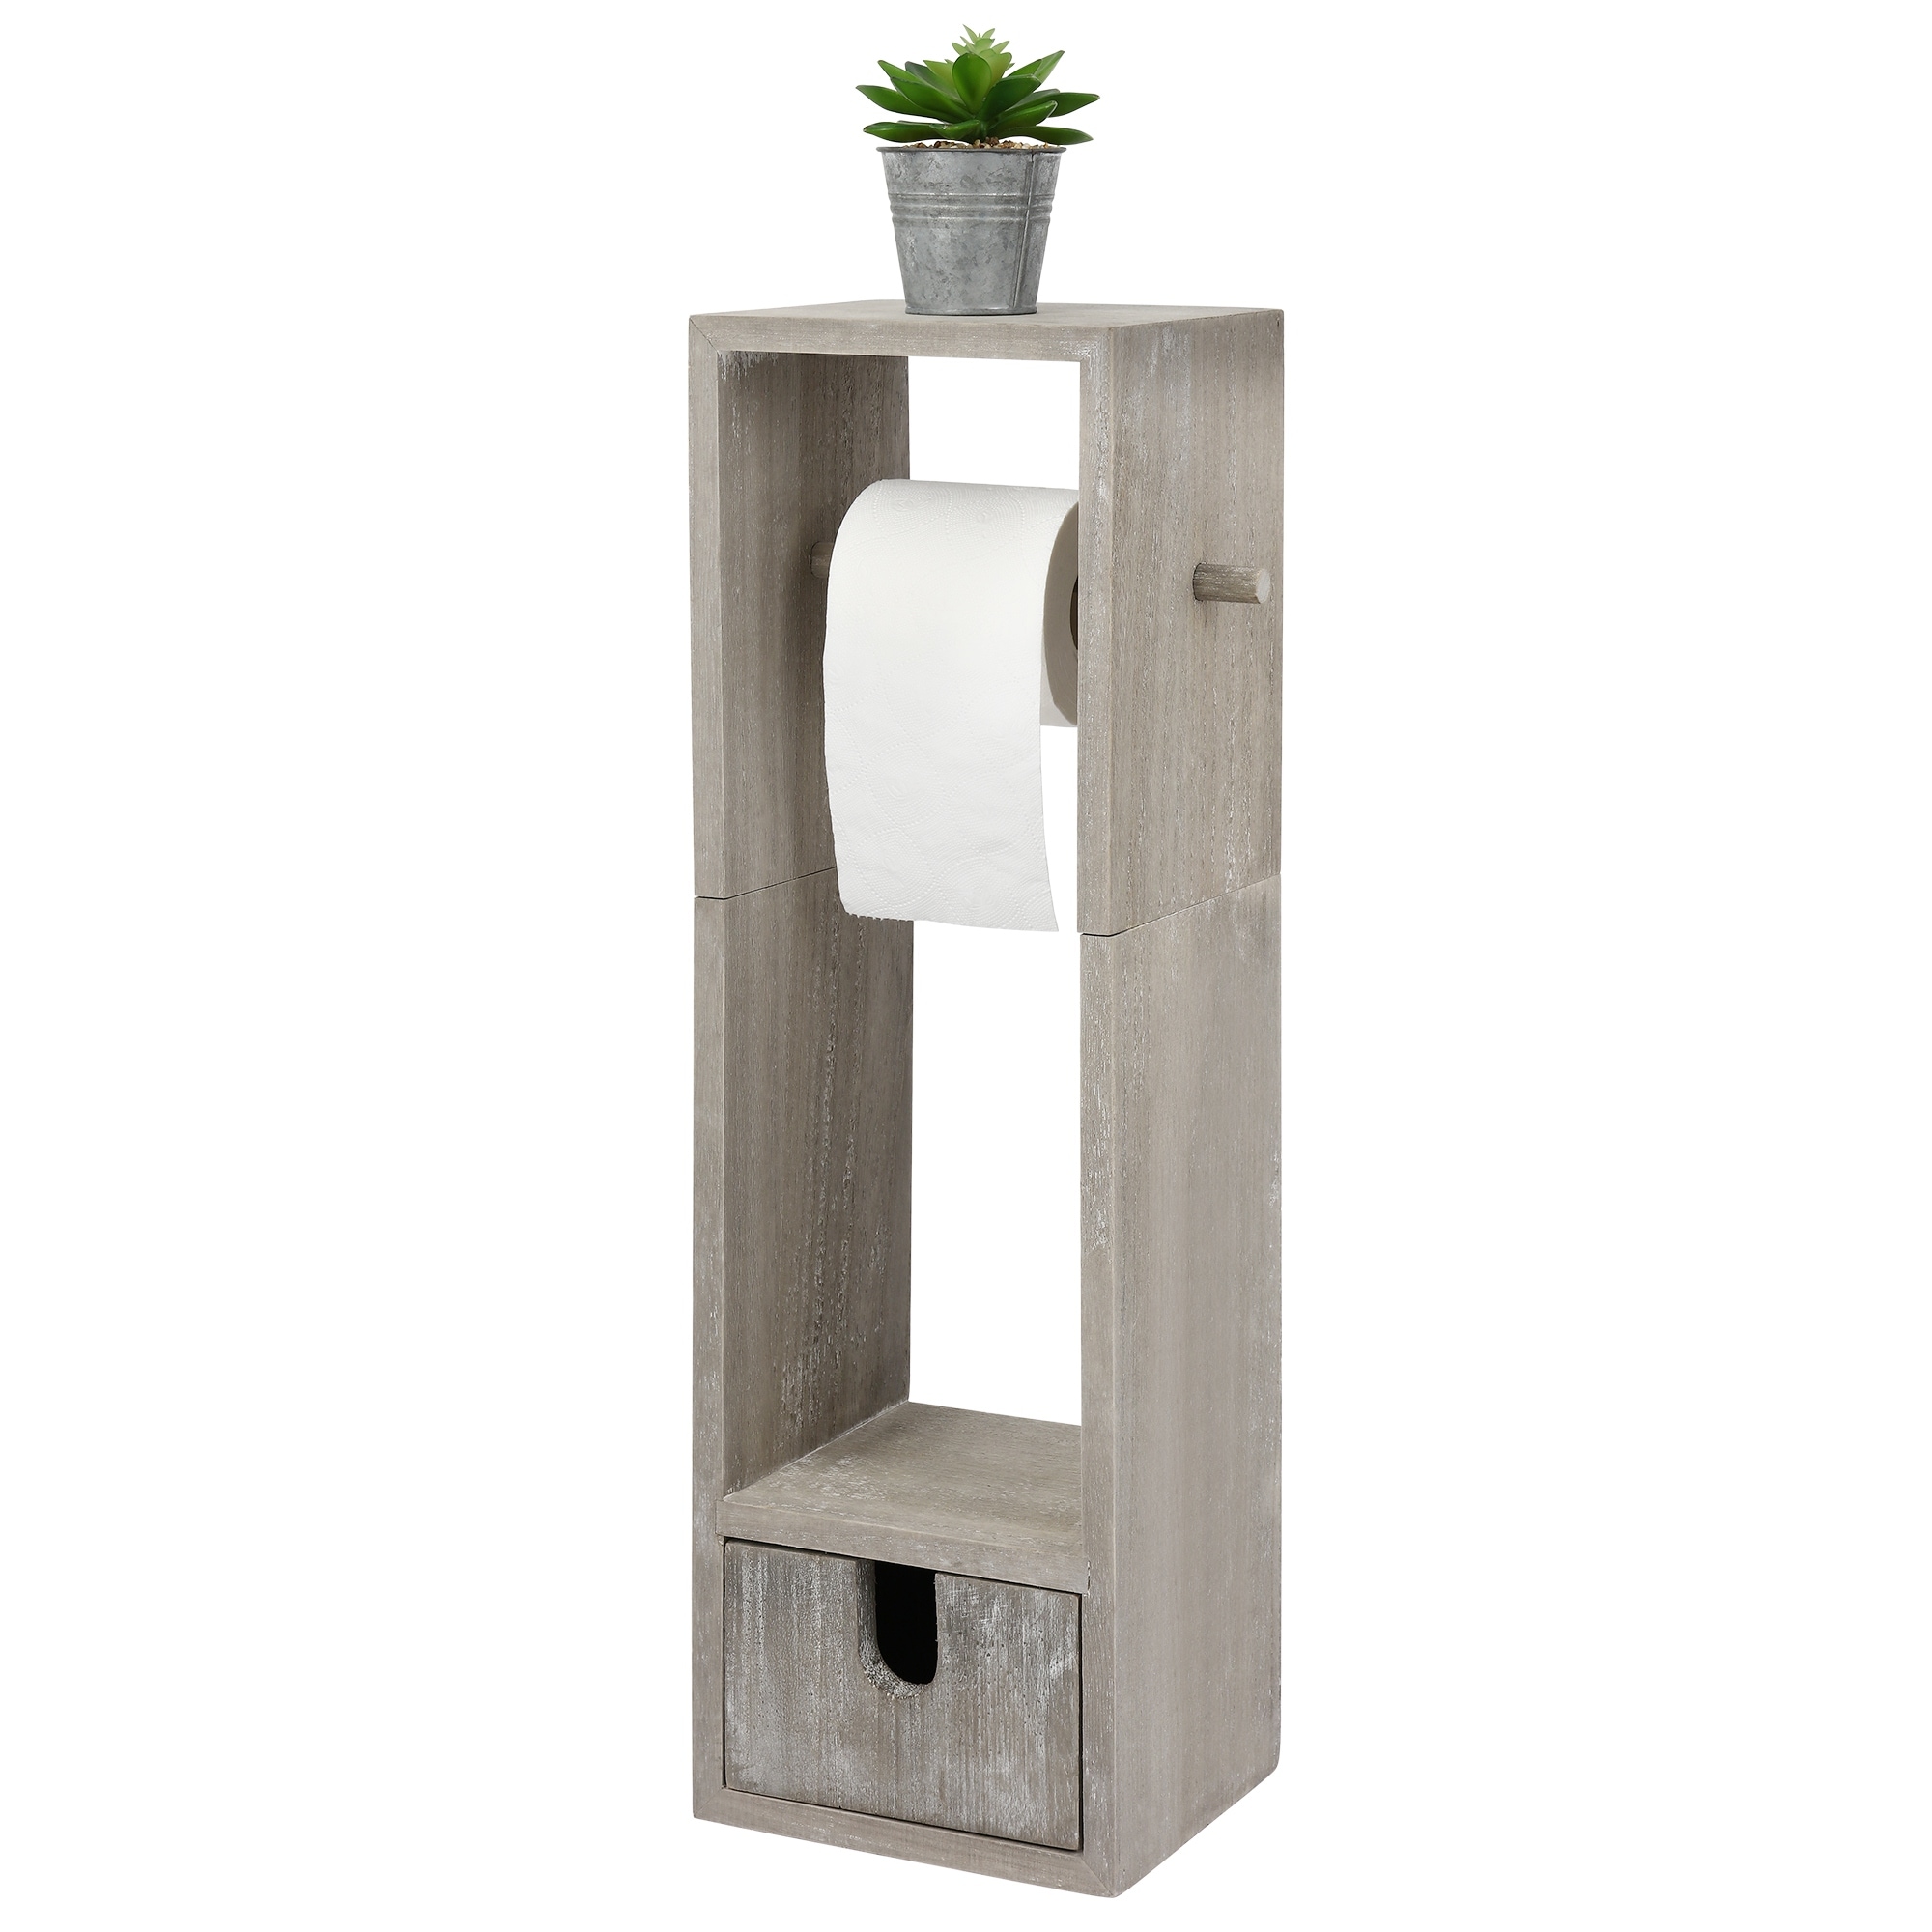 https://ak1.ostkcdn.com/images/products/is/images/direct/c1df88d0182b00d7fe6a92fbd3981107db9a91f7/Wood-Free-Standing-Toilet-Paper-Roll-Holder-with-Drawer.jpg